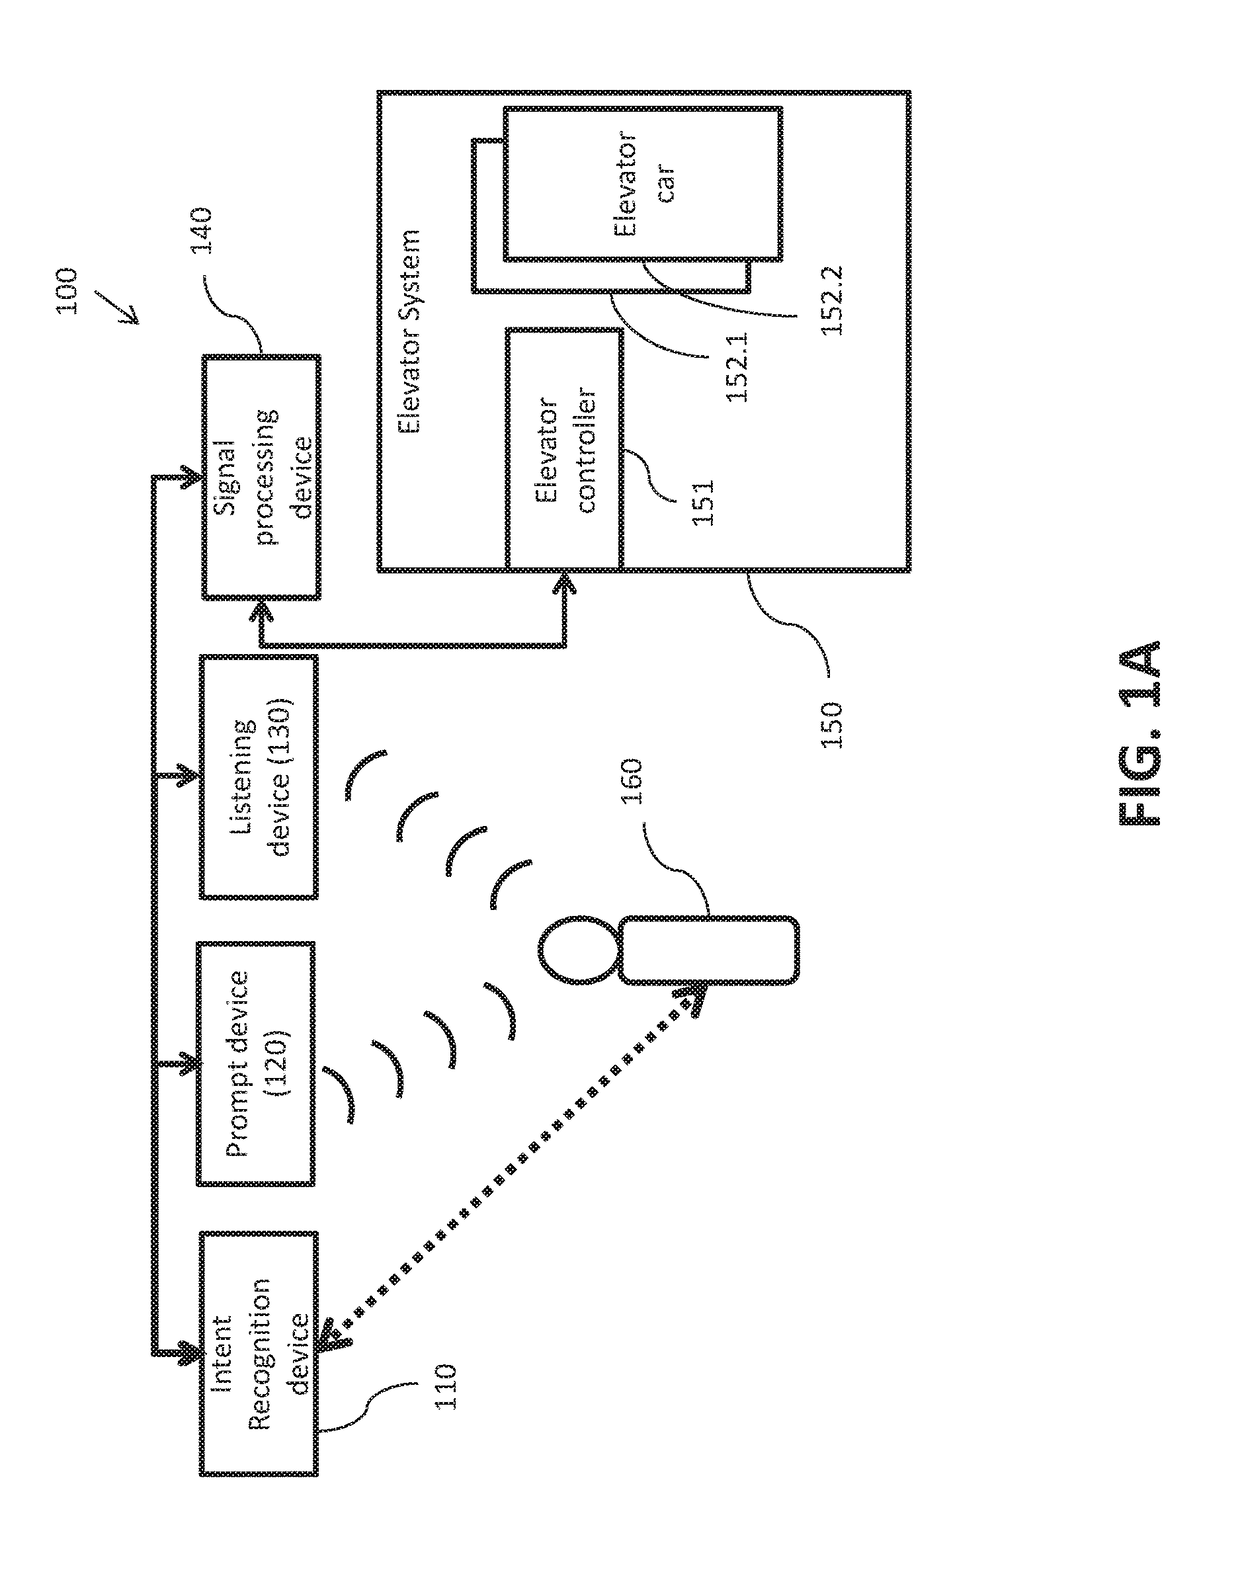 Intention recognition for triggering voice recognition system